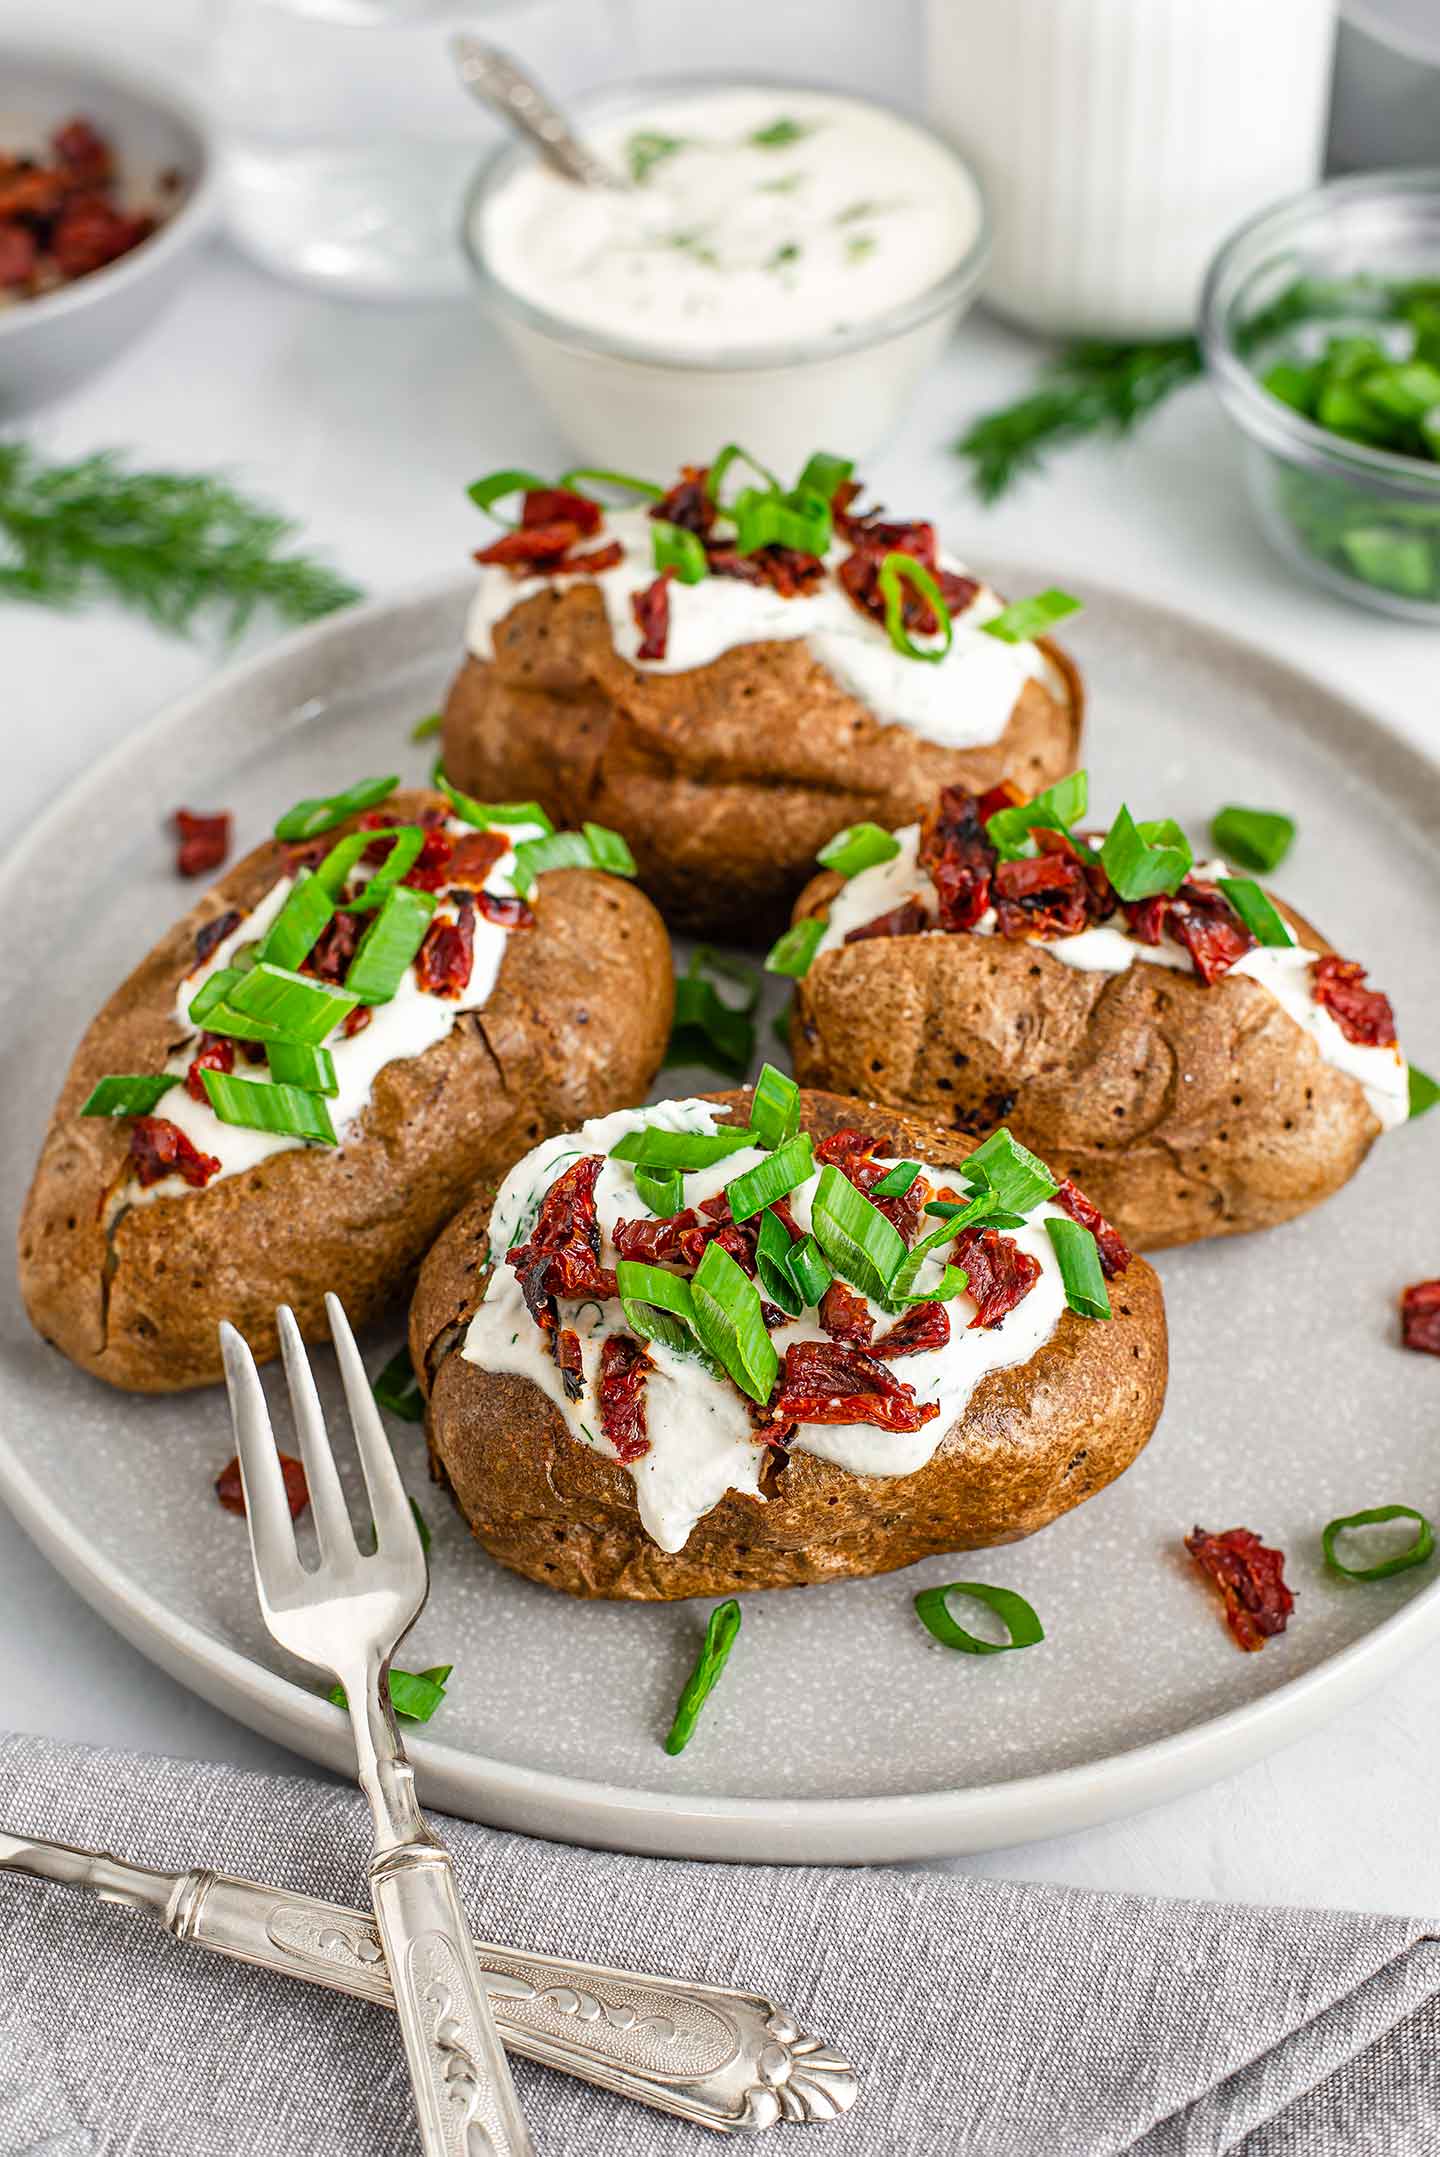 Top down view of 4 simple vegan baked potatoes loaded with vegan sour cream, sun-dried tomato "bacon" bits, and sliced green onion.